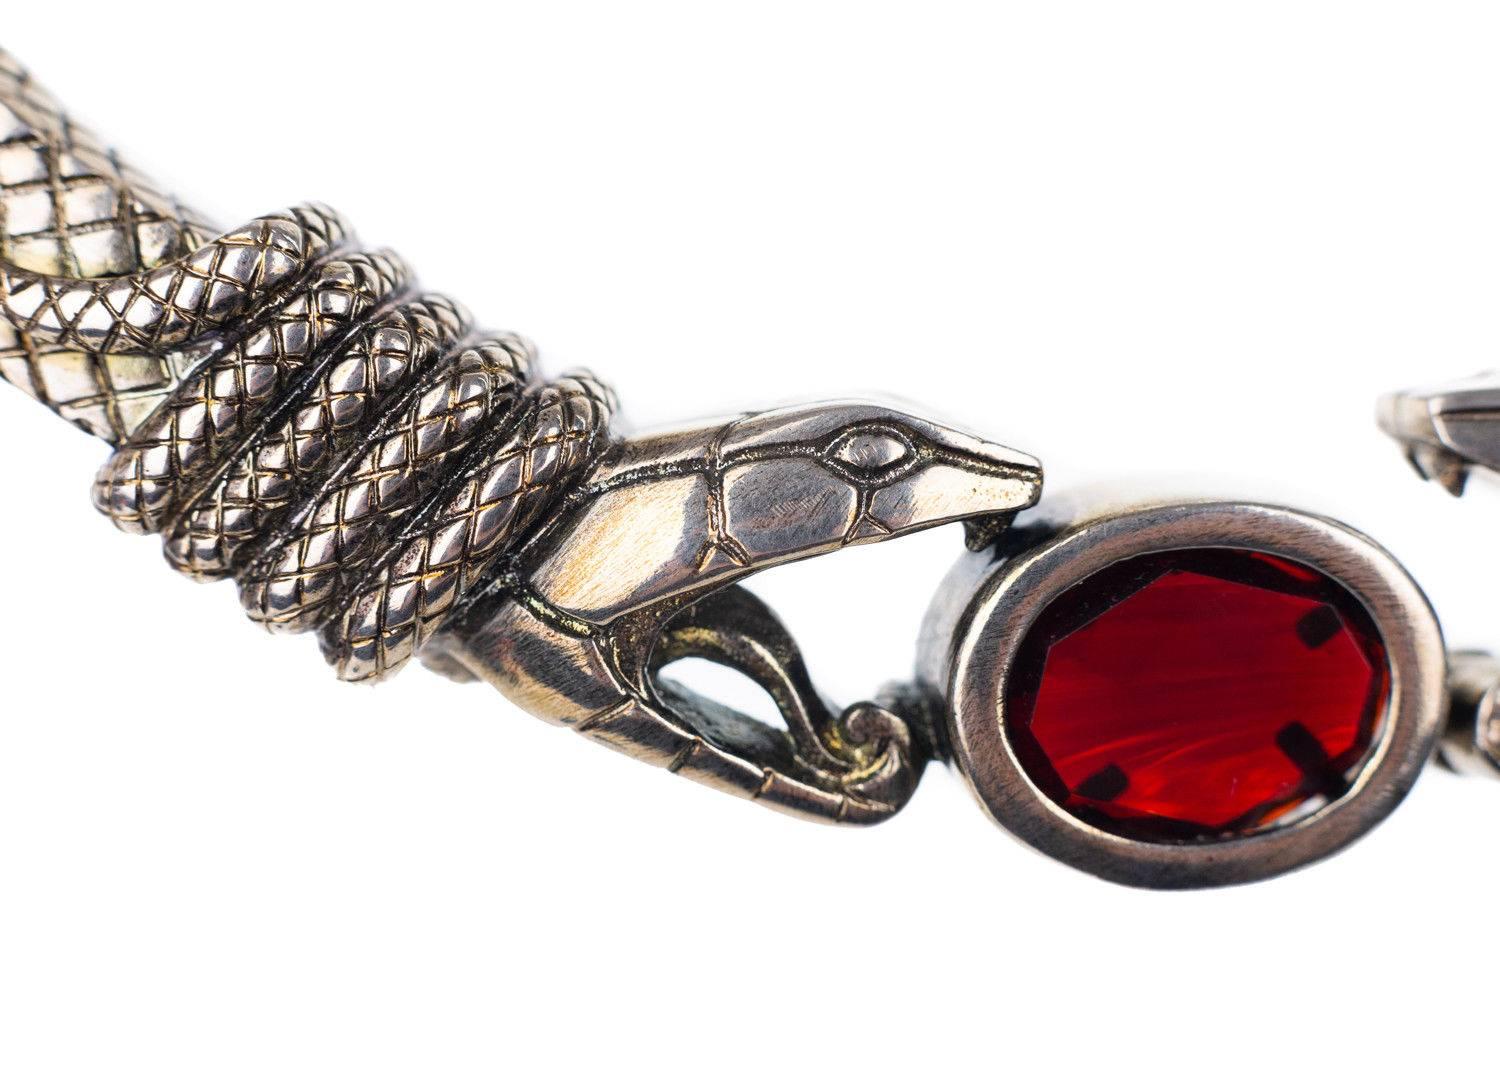 Roberto Cavalli silver plated choker necklace. This necklace features serpent detailing and a red stone gem in the middle of the necklace. Perfect to style with on an all black ensemble for a bit of edginess to your style.

Brass
Silver